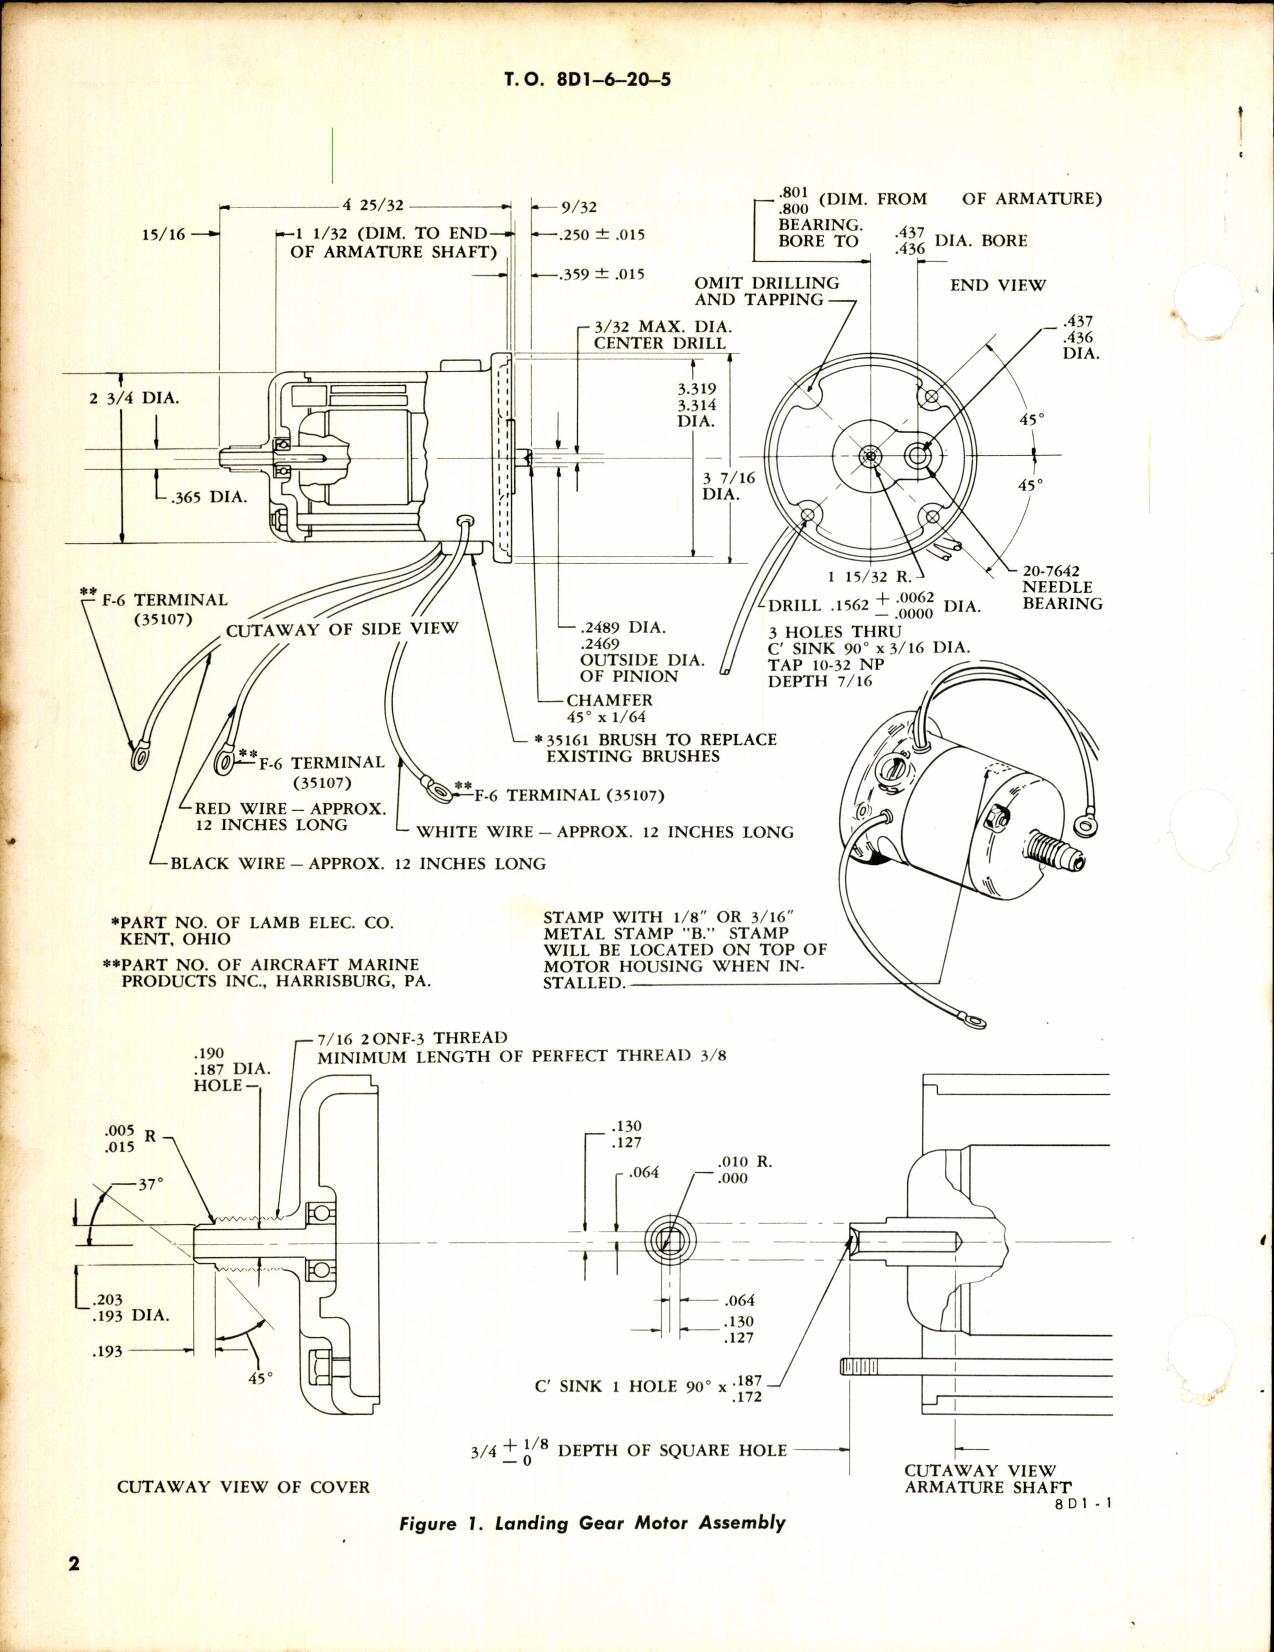 Sample page 2 from AirCorps Library document: Landing Gear Motor Assembly Difference Between Lamb & Beech